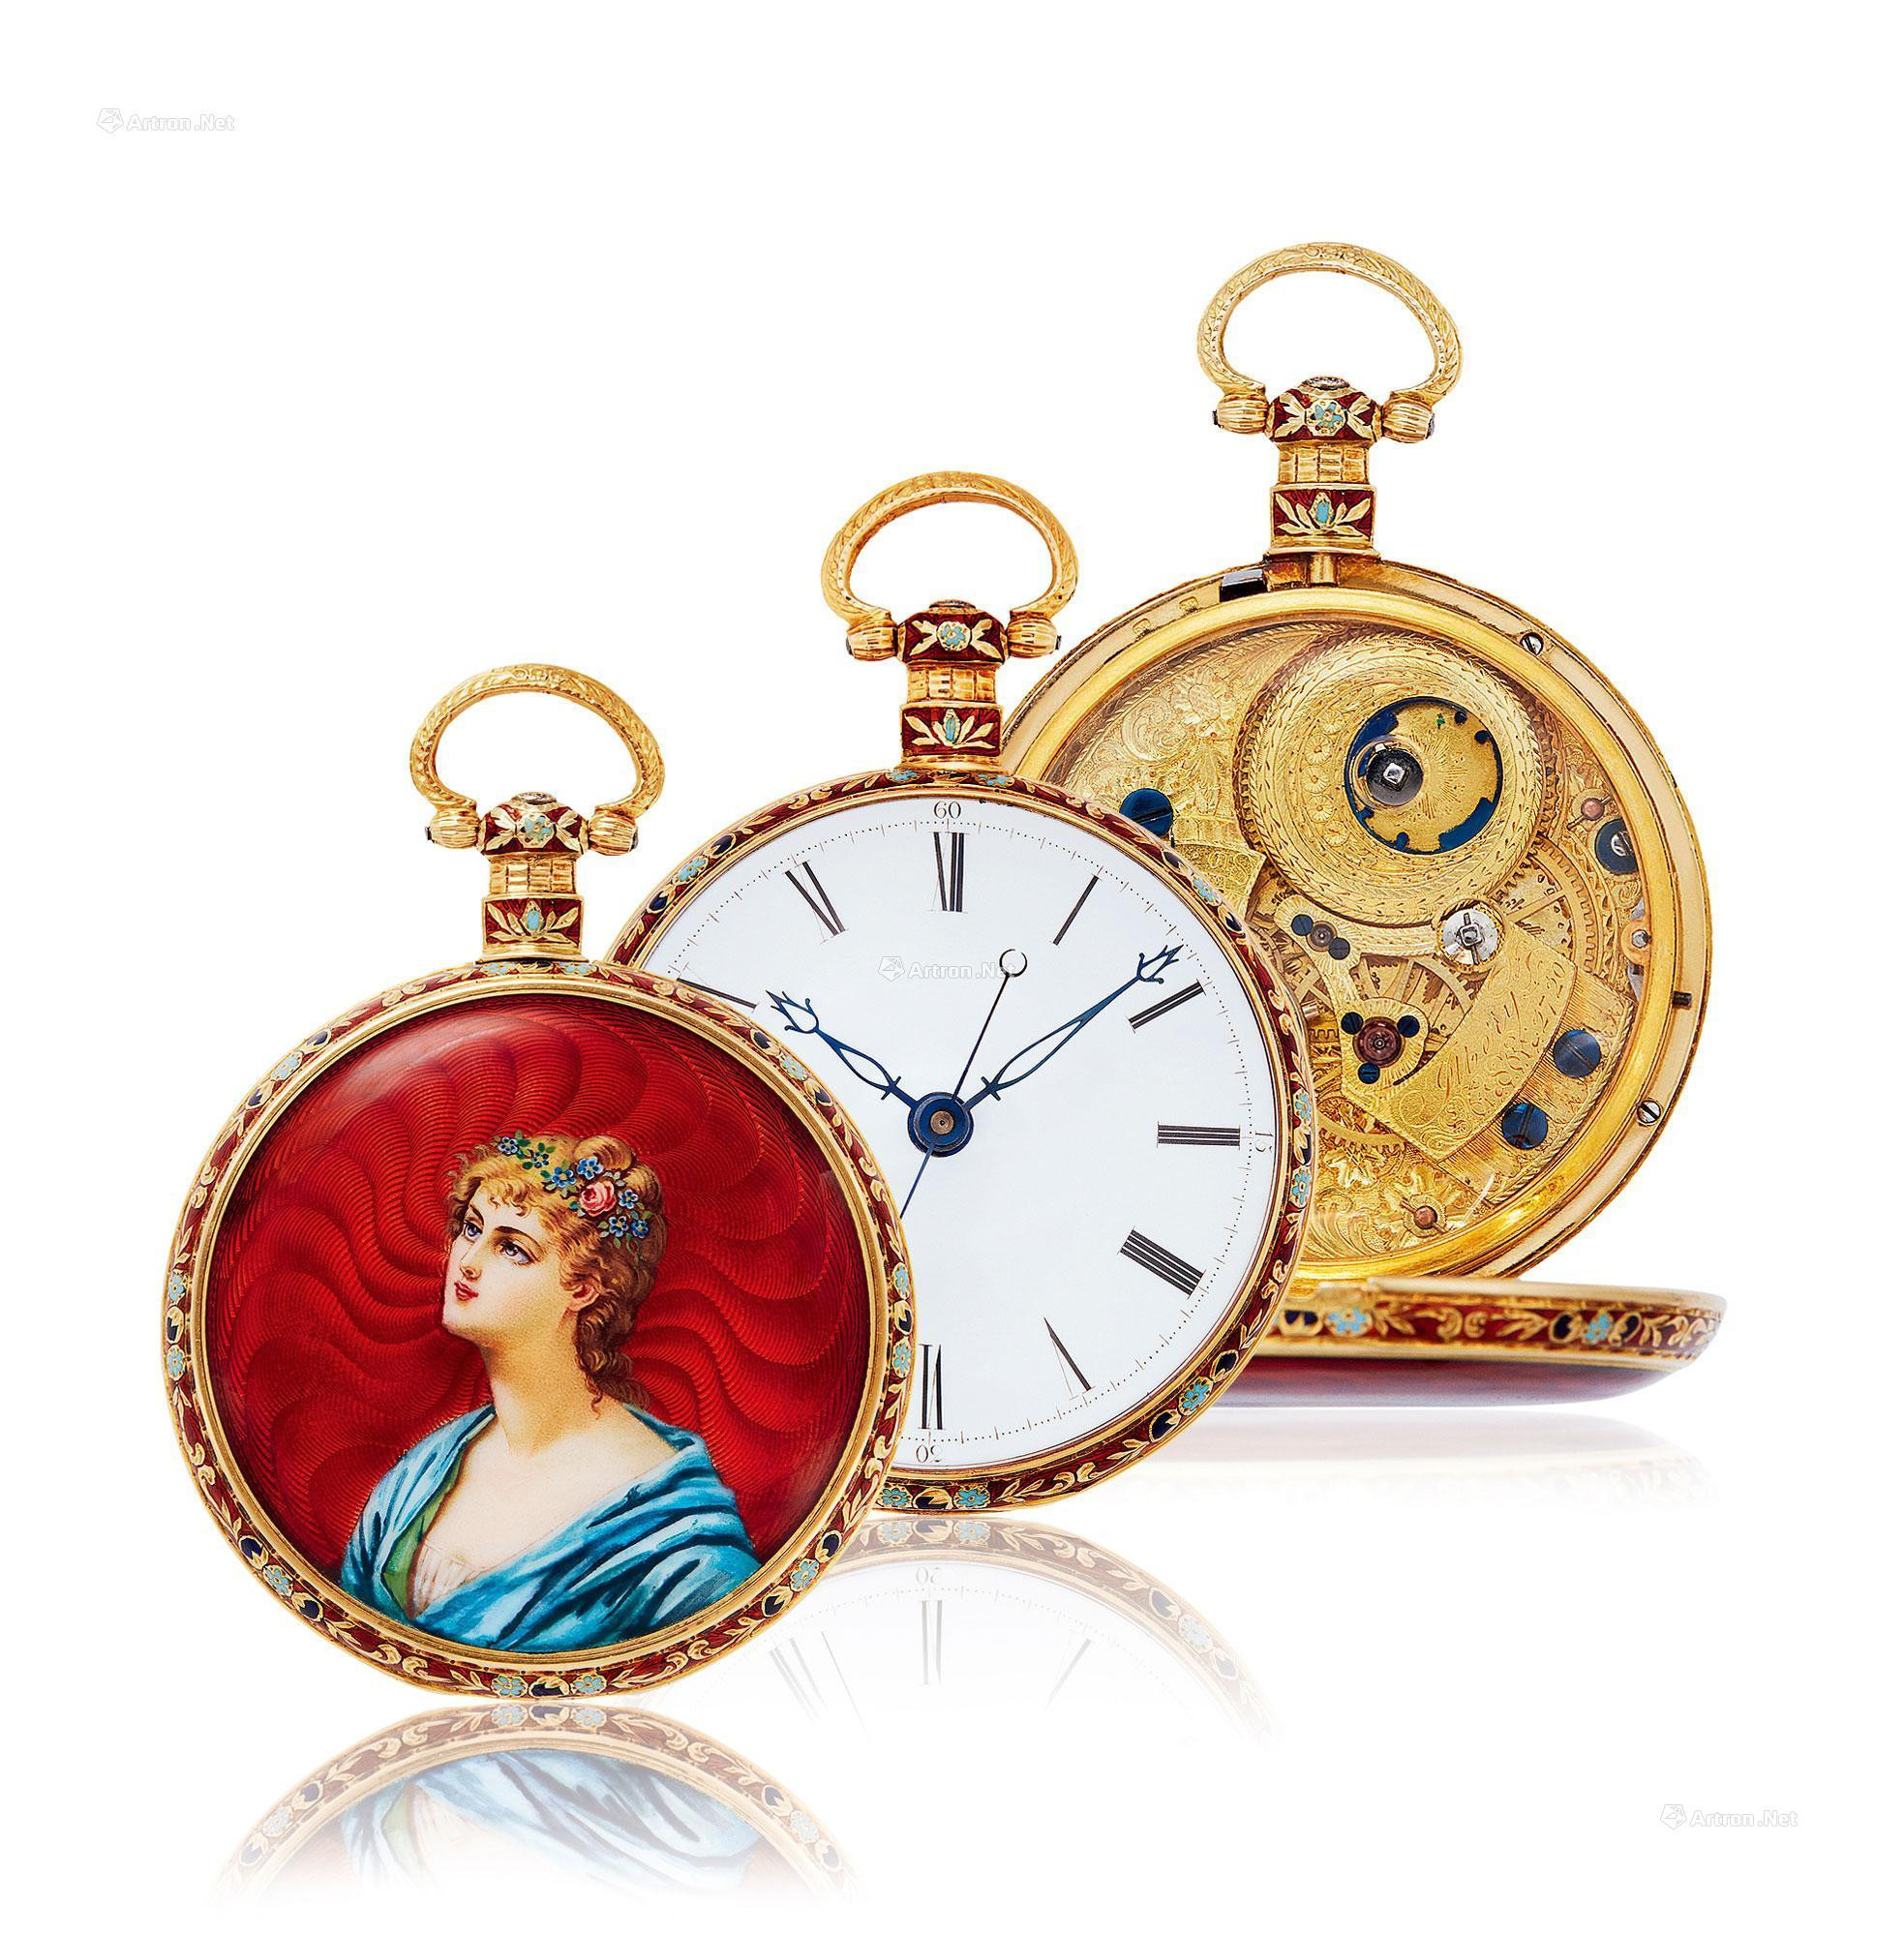 SWITZERLAND A YELLOW GOLD OPEN-FACED MANUALLY-WOUND POCKET WATCH WITH ENAMEL CASE